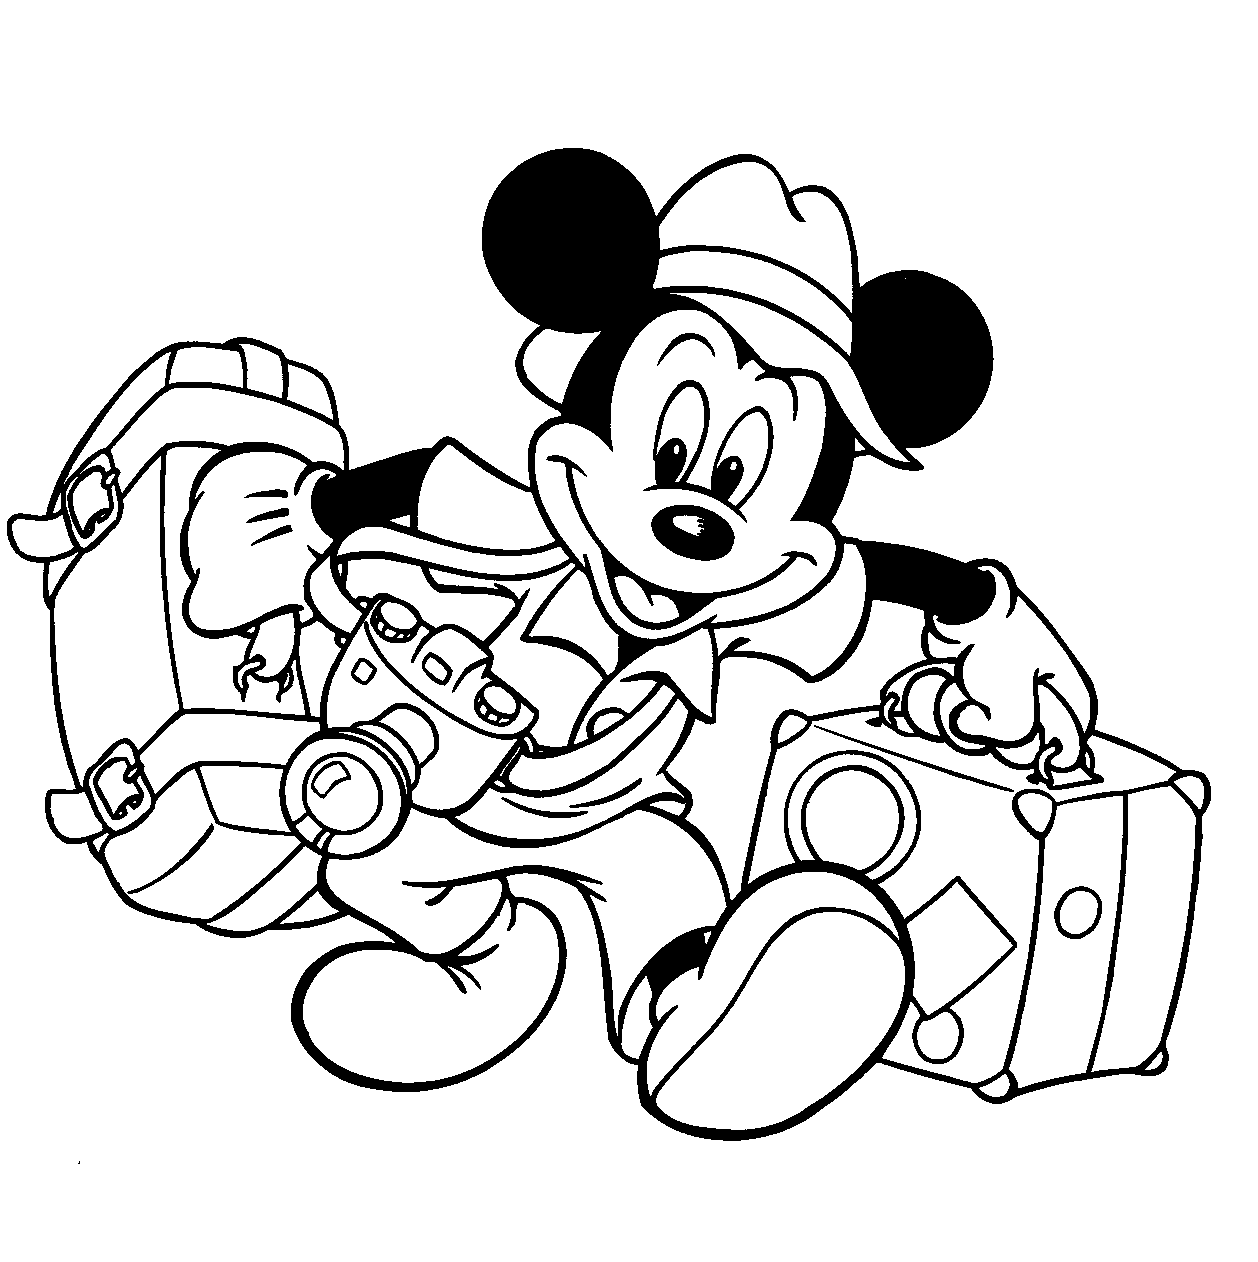 mickey mouse clip art free black and white - photo #15